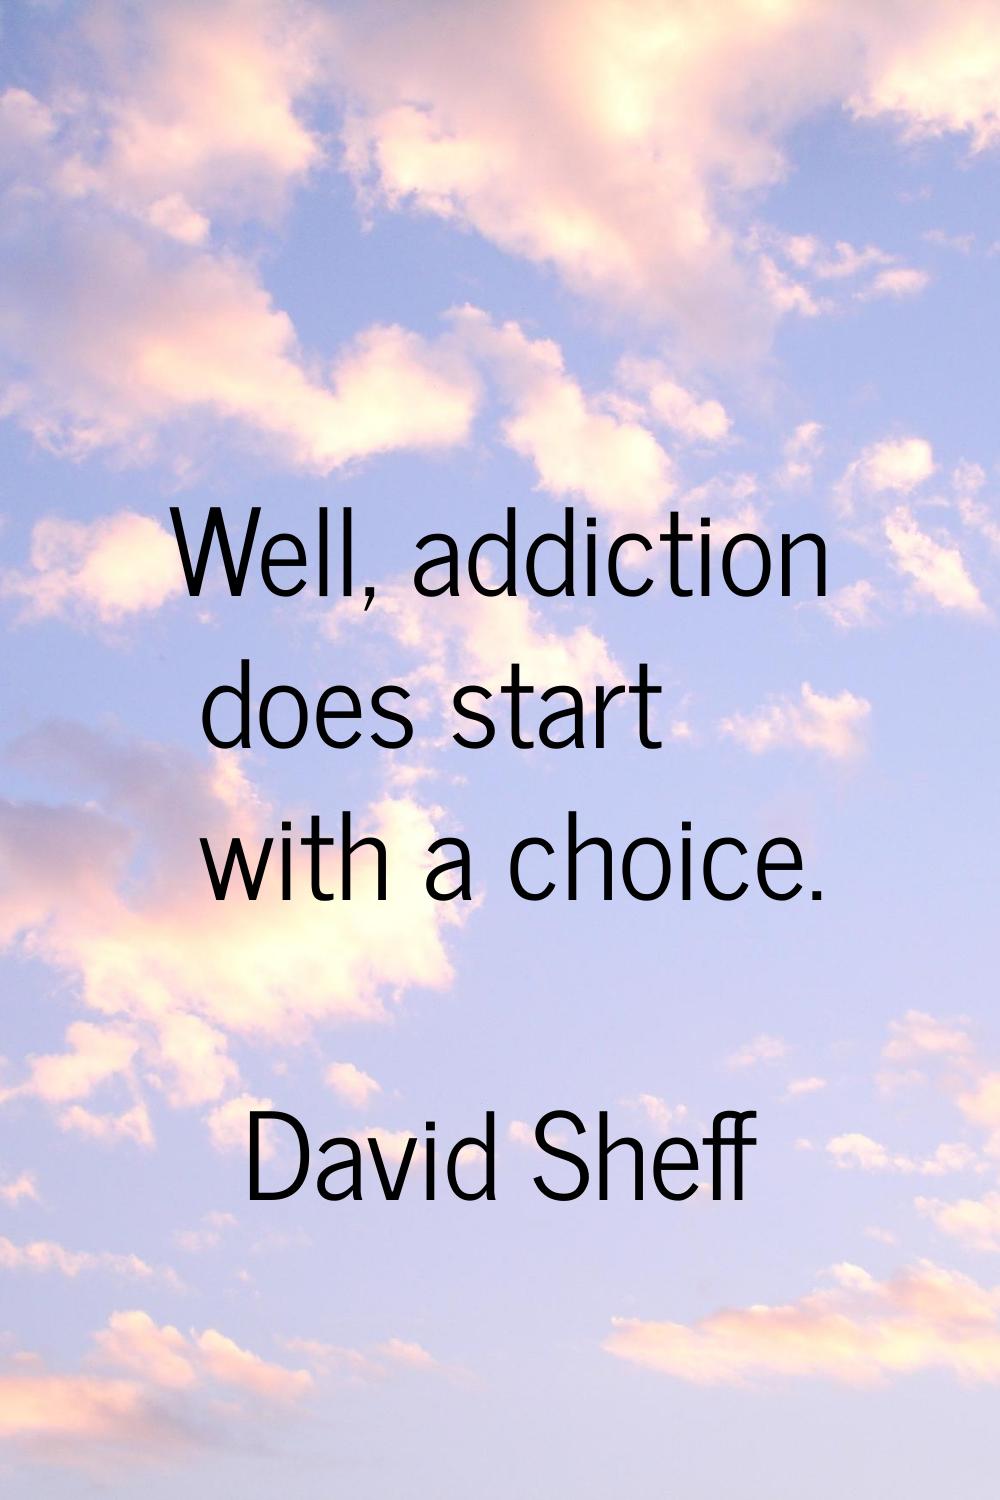 Well, addiction does start with a choice.